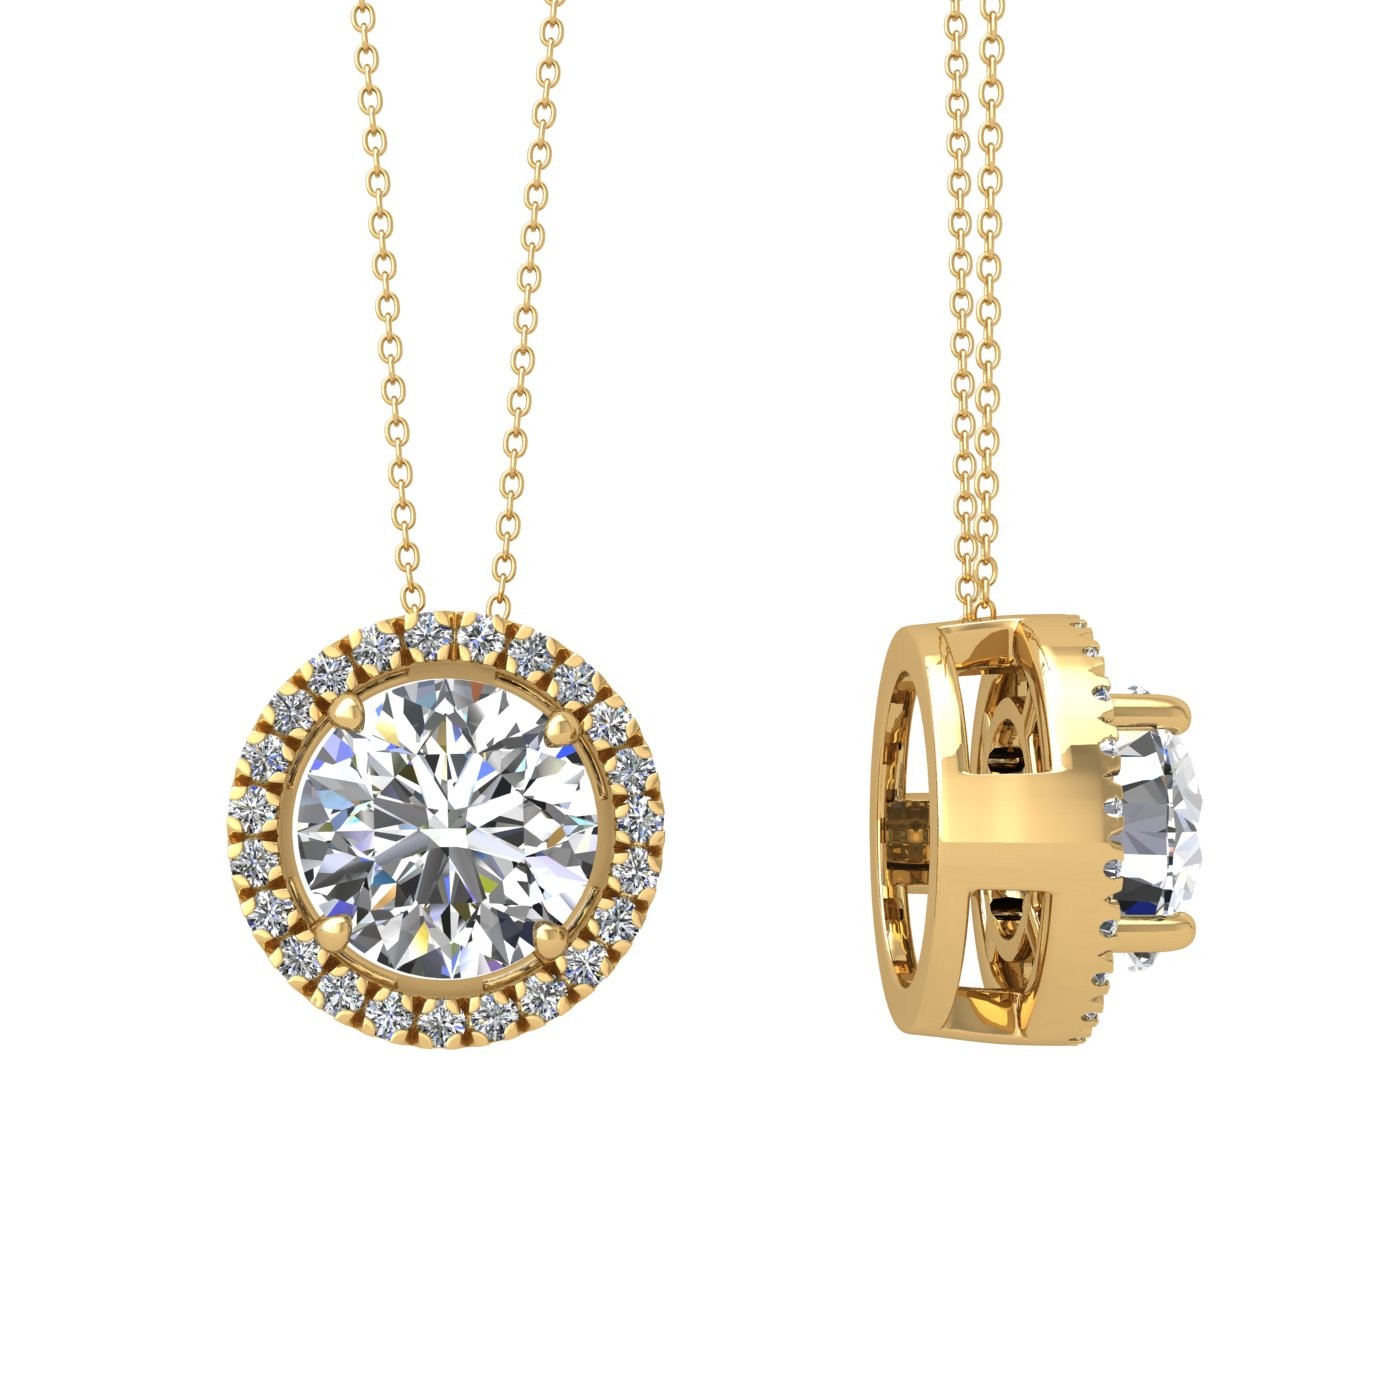 18k yellow gold  1,5 ct 4 prong round shape diamond pendant with diamond pavÉ set halo including chain seperate from the pendant Photos & images